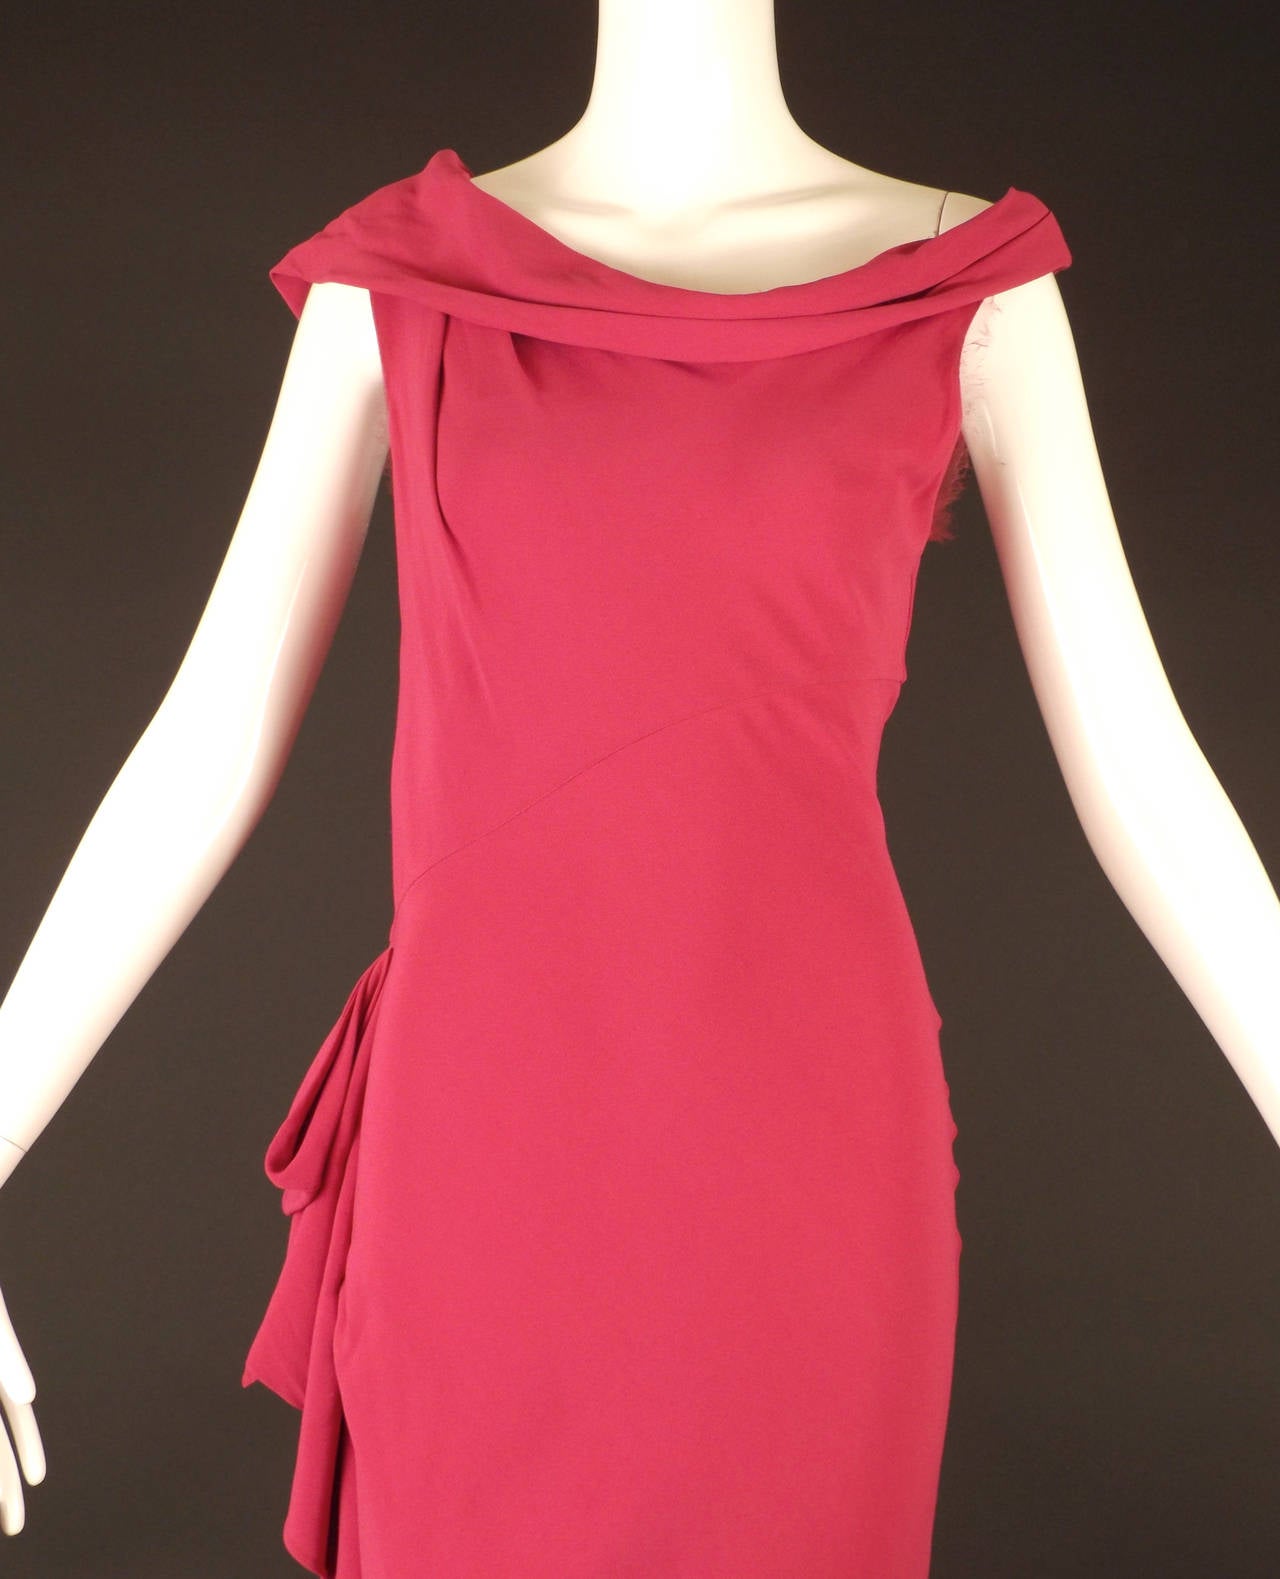 Elegant 1930s style, bias cut evening gown in a hot pink silk crepe. The gown has a bias bodice with a draped, cowl neckline that falls in pleats from the left shoulder and circles the neck with draping over the right arm.  Diagonal cut waist seam